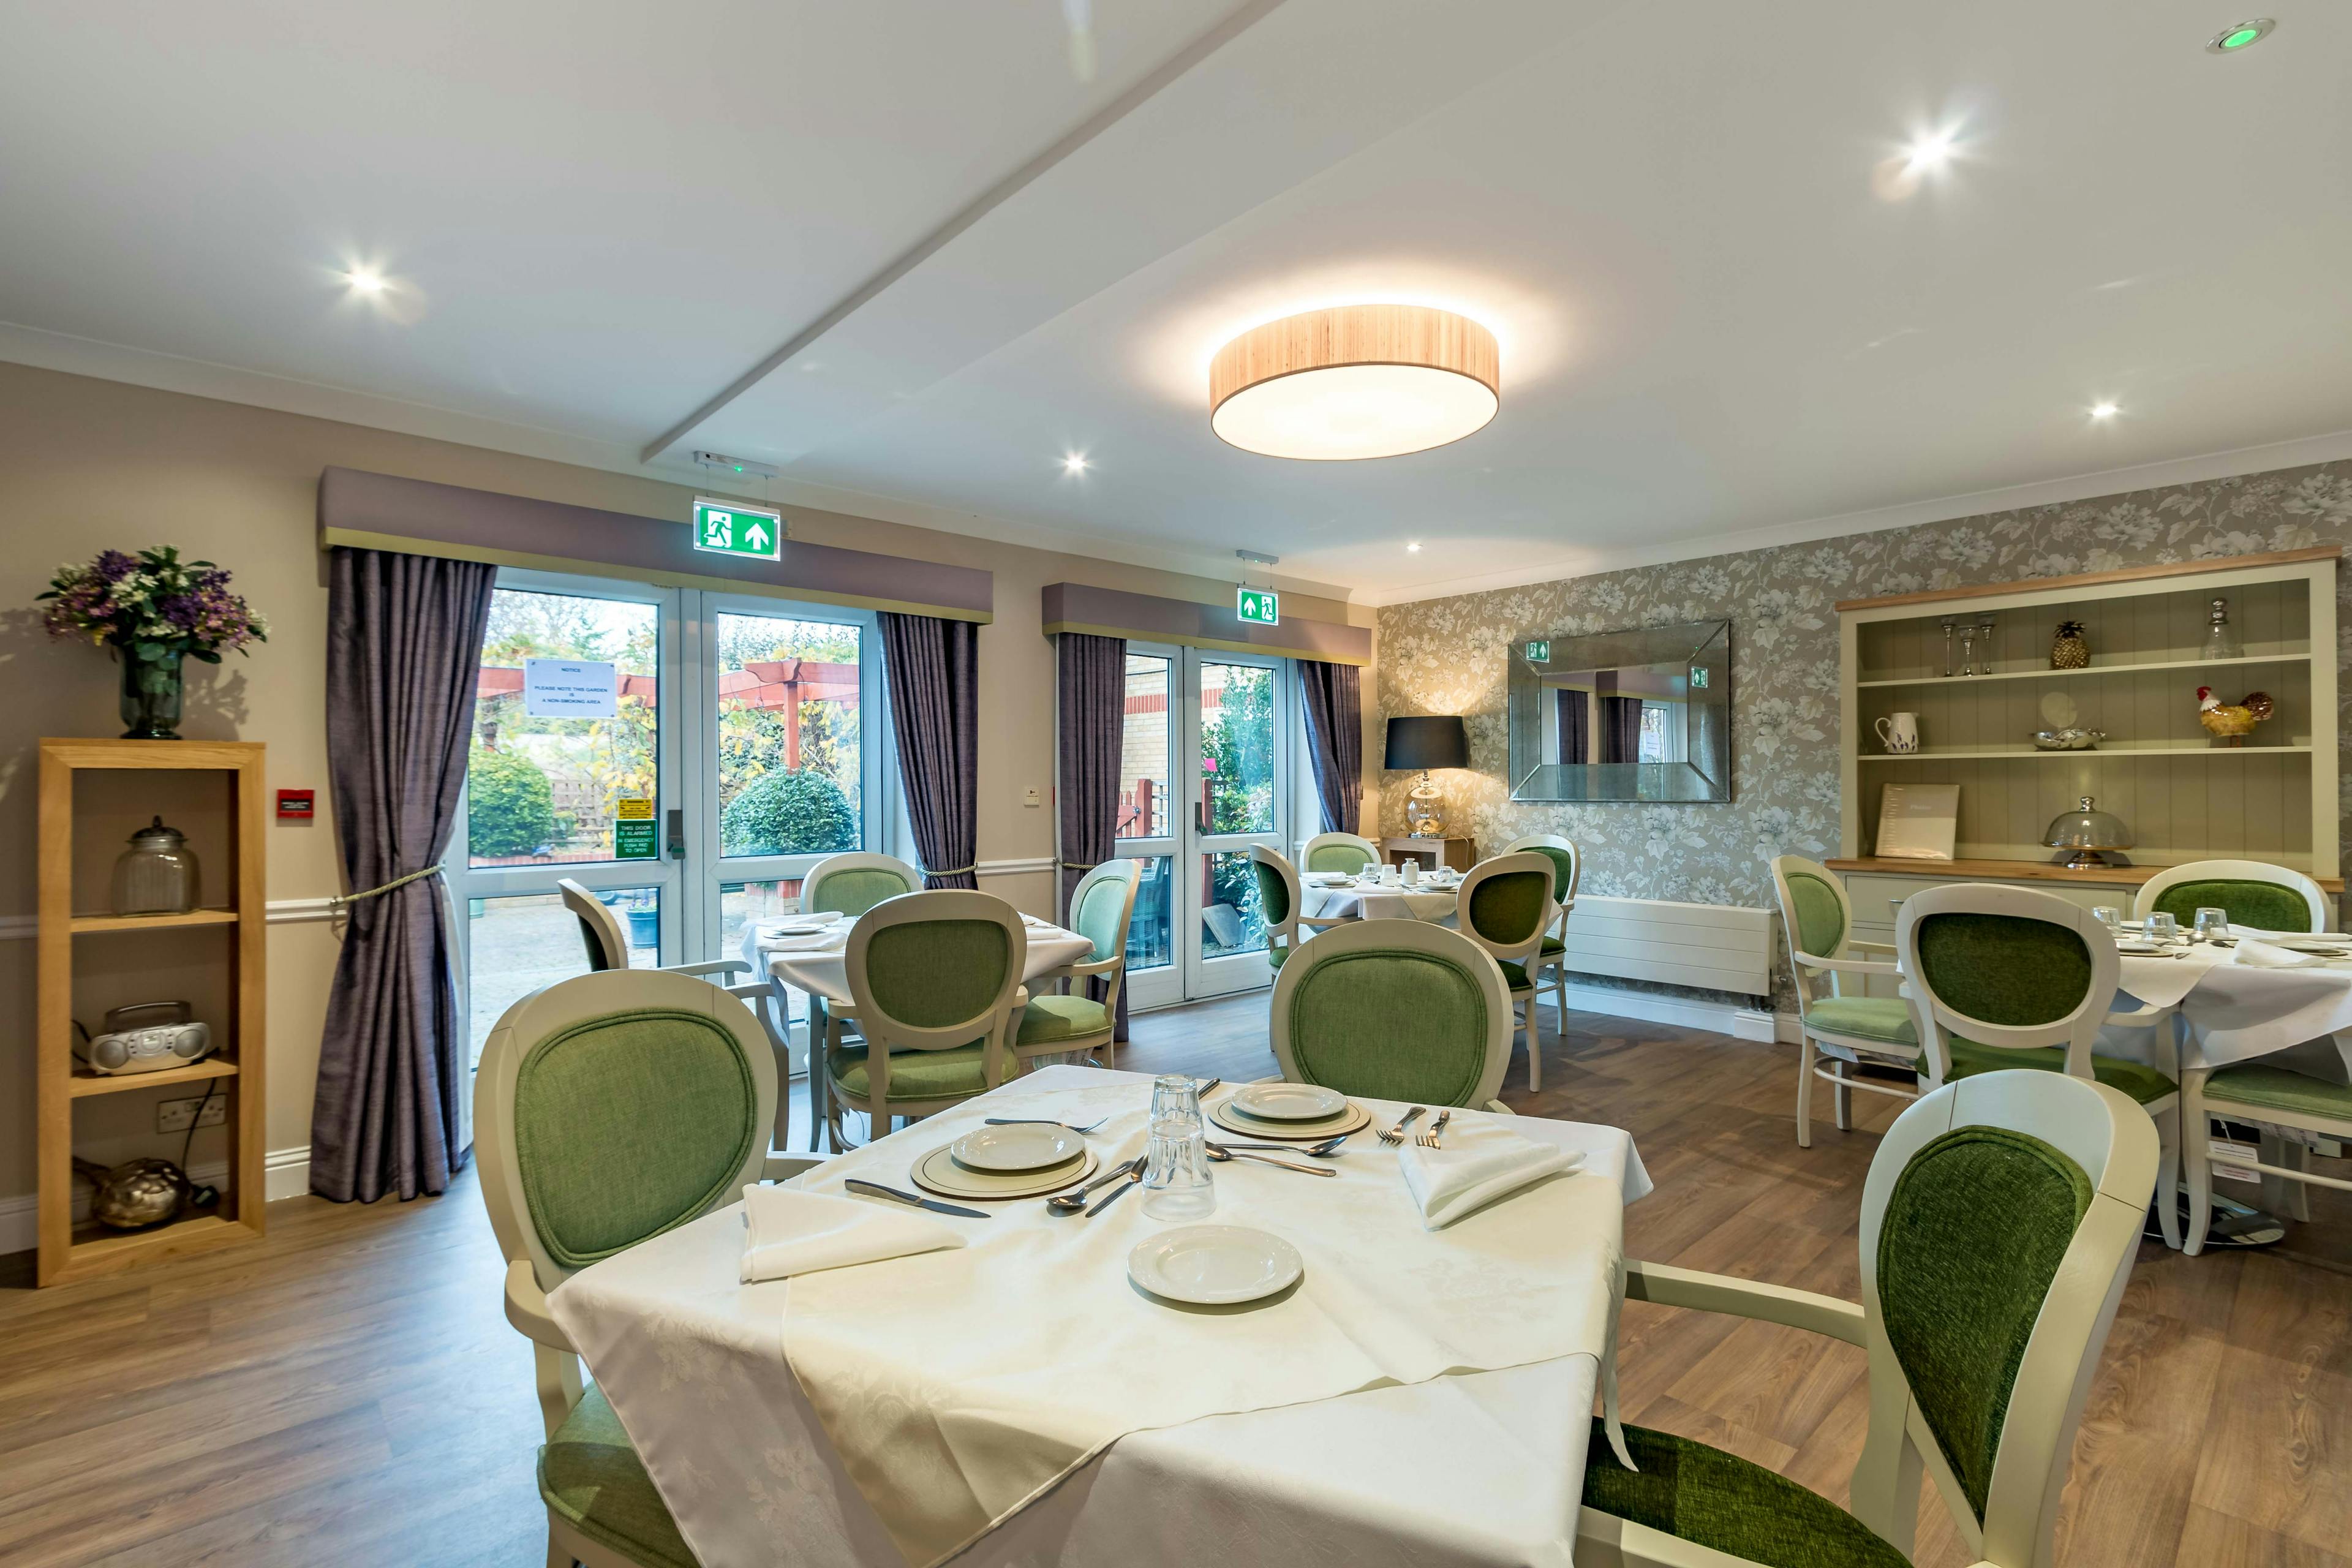 Dining Room of Newington Court Care Home in Sittingbourne, Kent